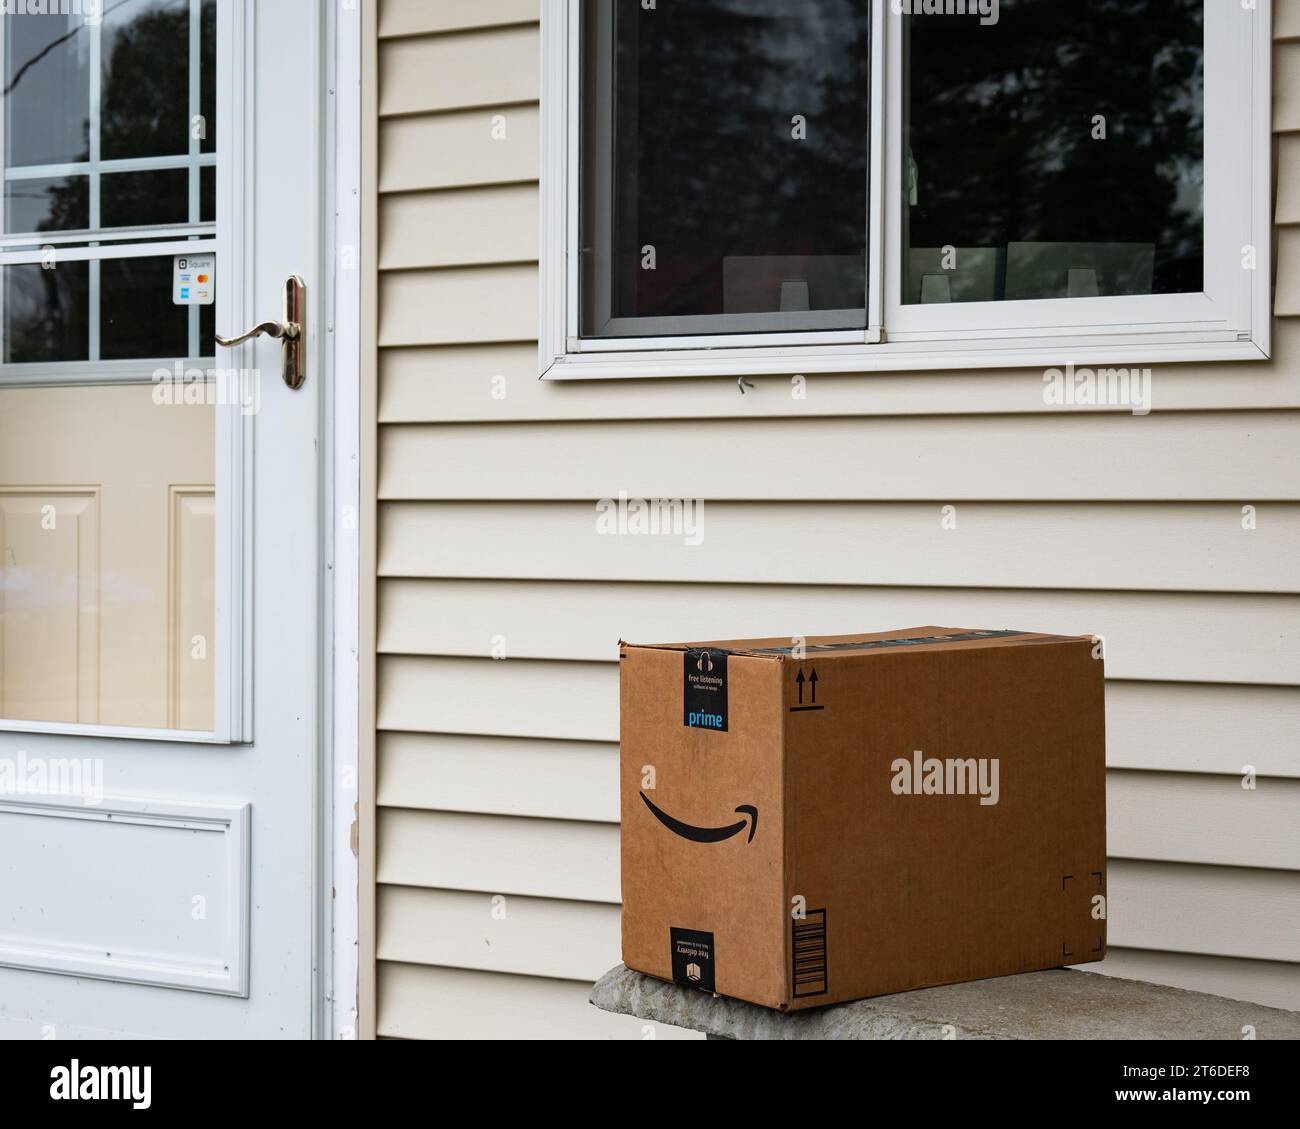 An Amazon Prime delivery box left on a bench by a door Stock Photo